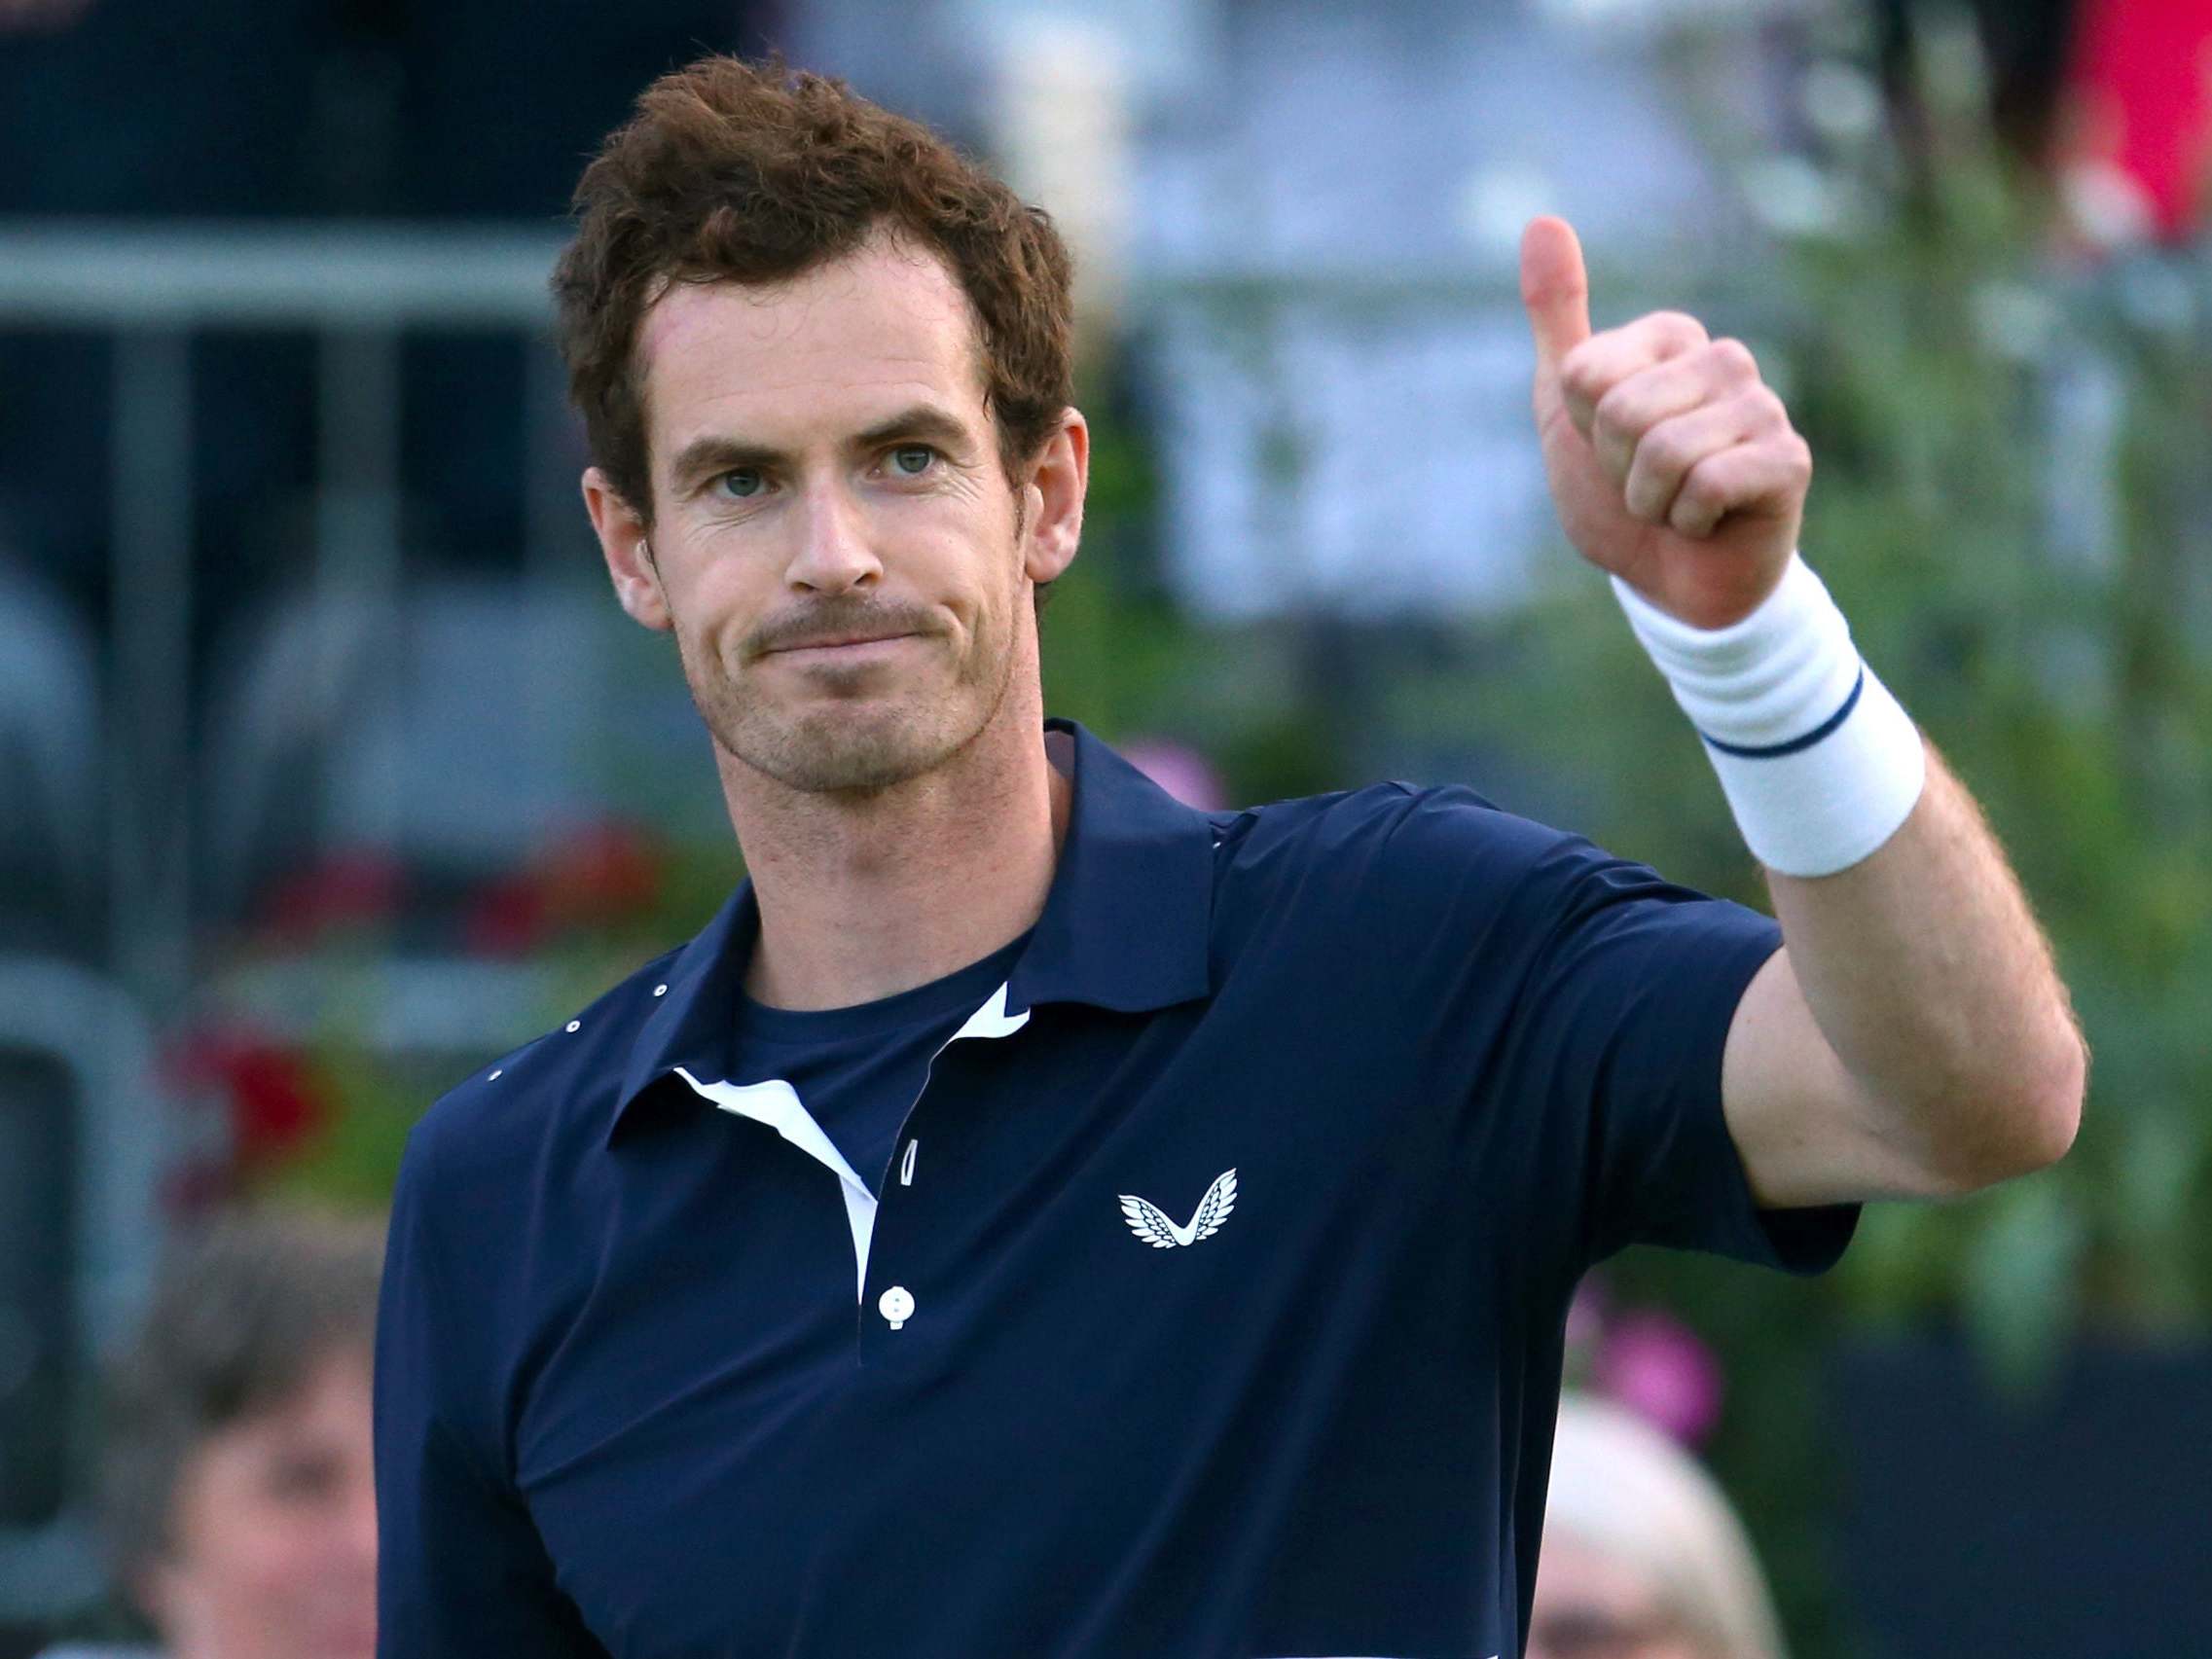 Andy Murray: I need to remember why I love playing tennis - Flipboard